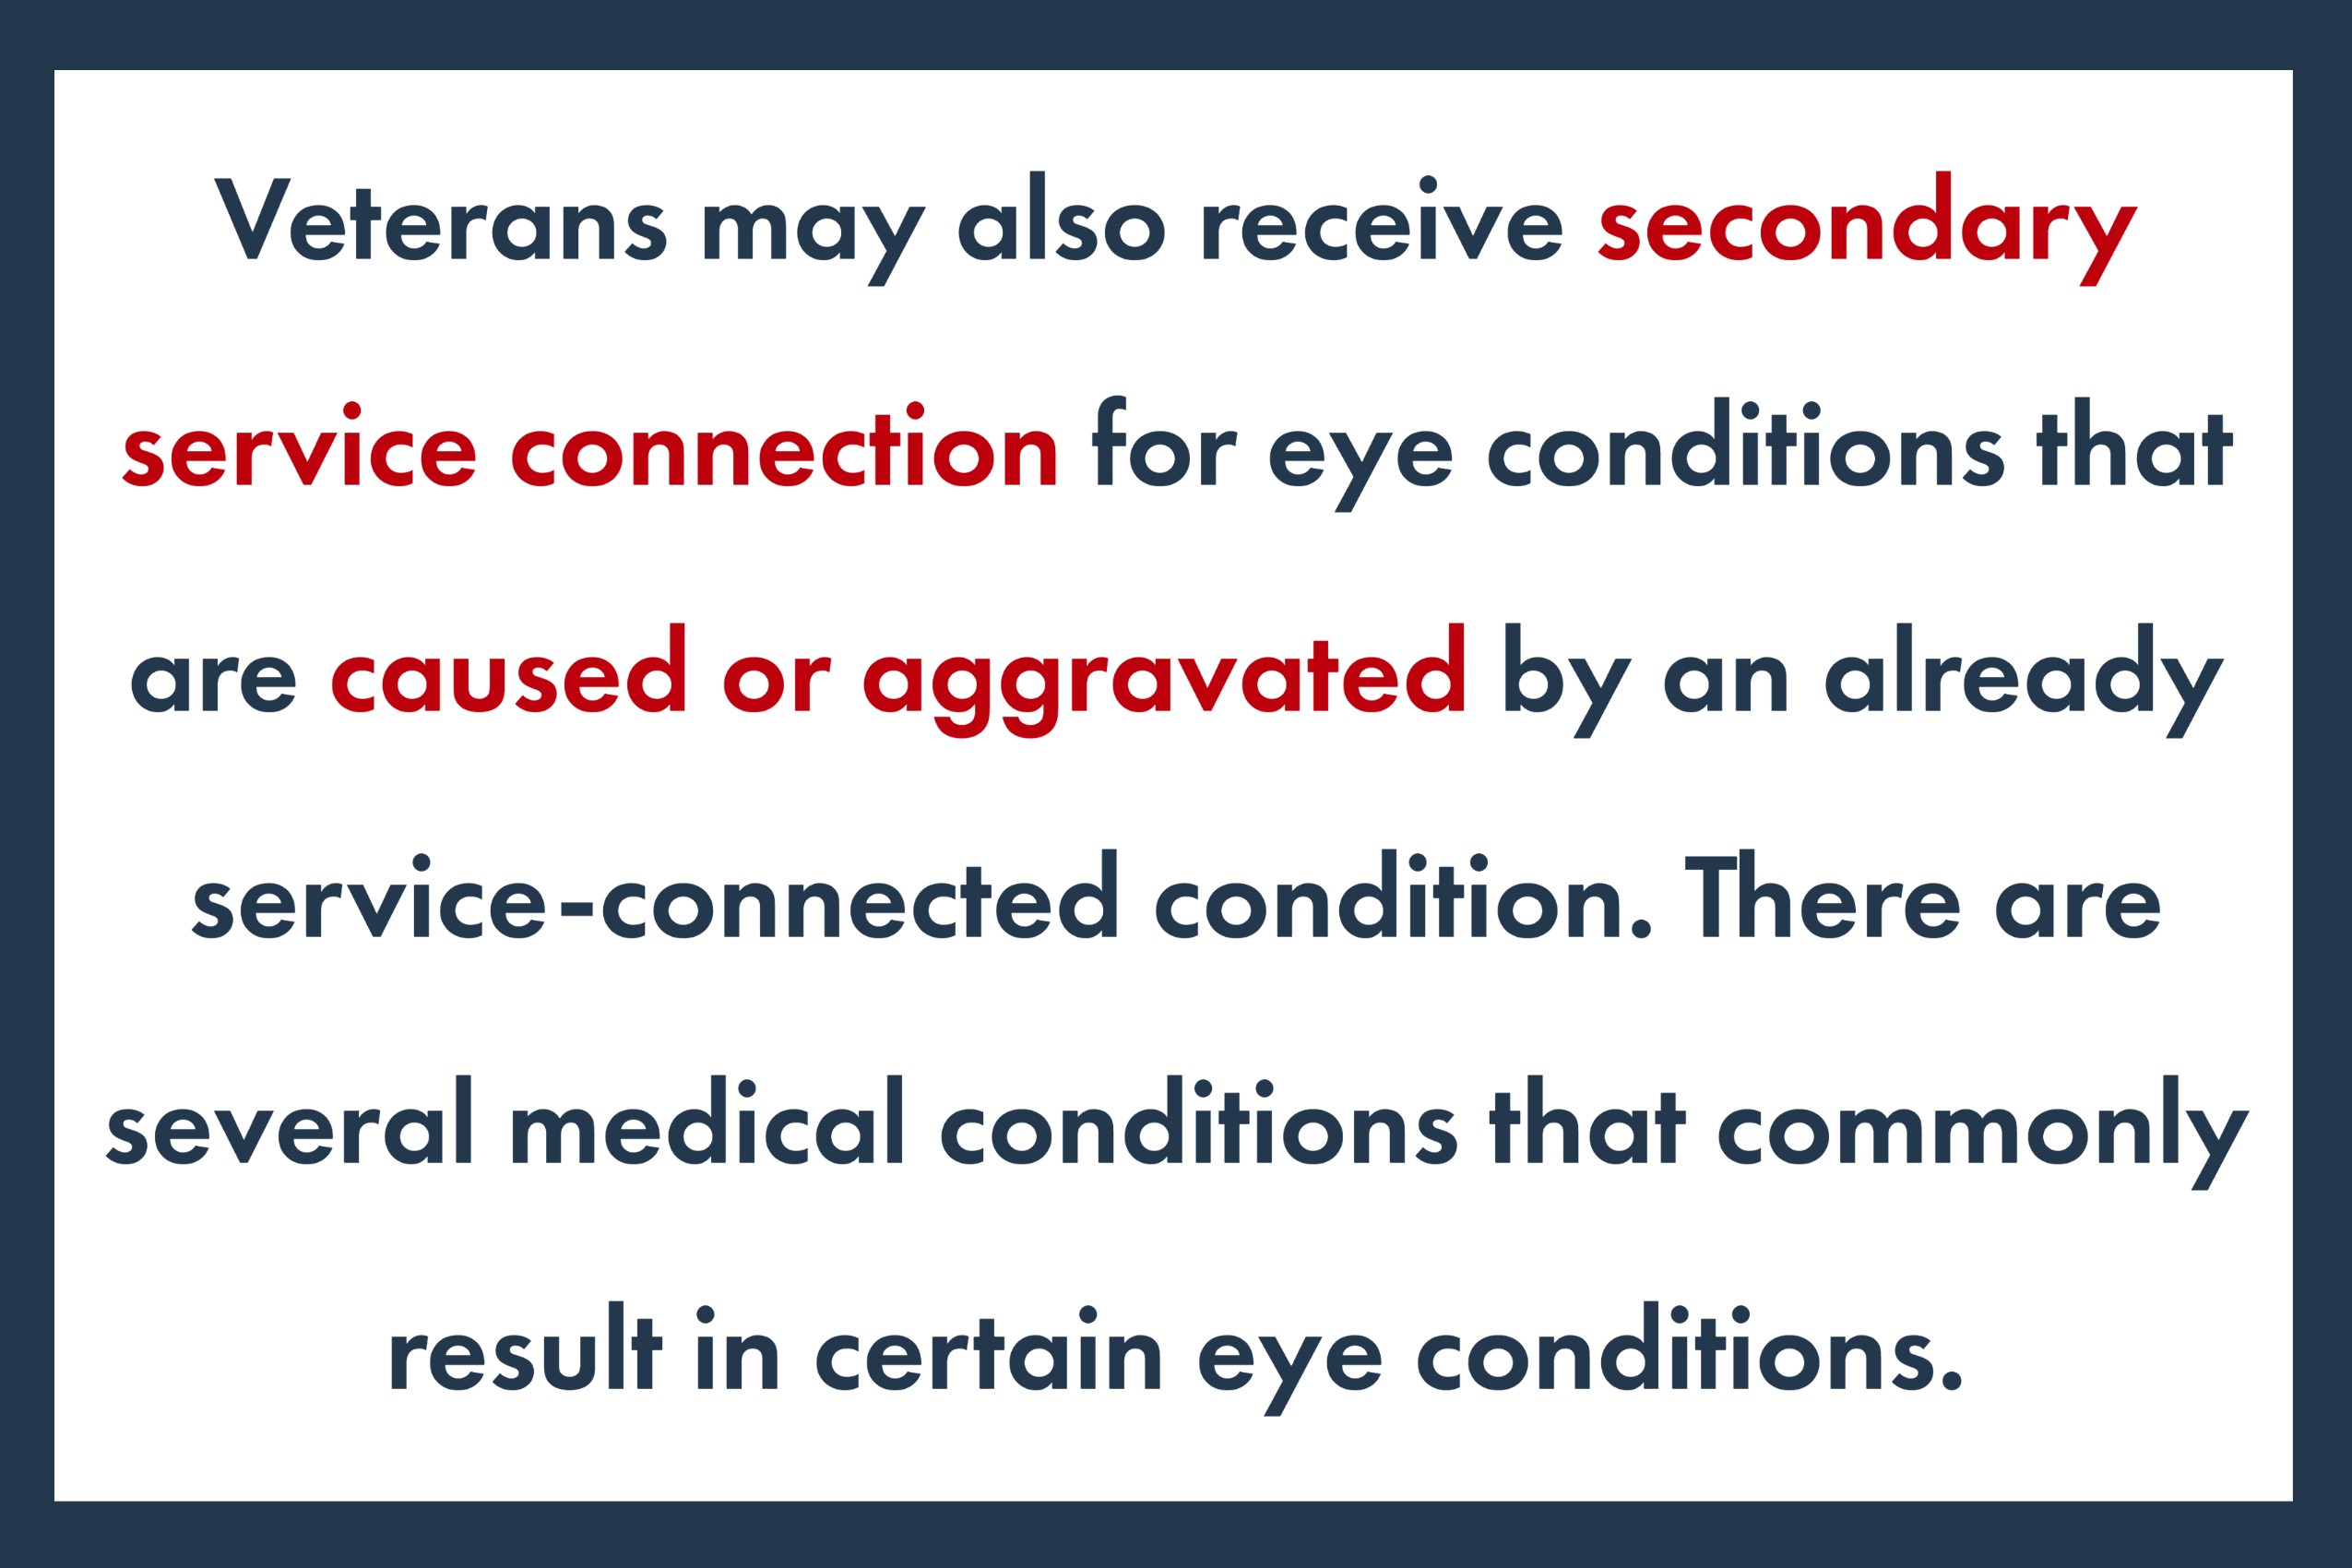 Veterans may also receive secondary service connection for eye conditions that are caused or aggravated by an already service-connected condition.  There are several medical conditions that commonly result in certain eye conditions.